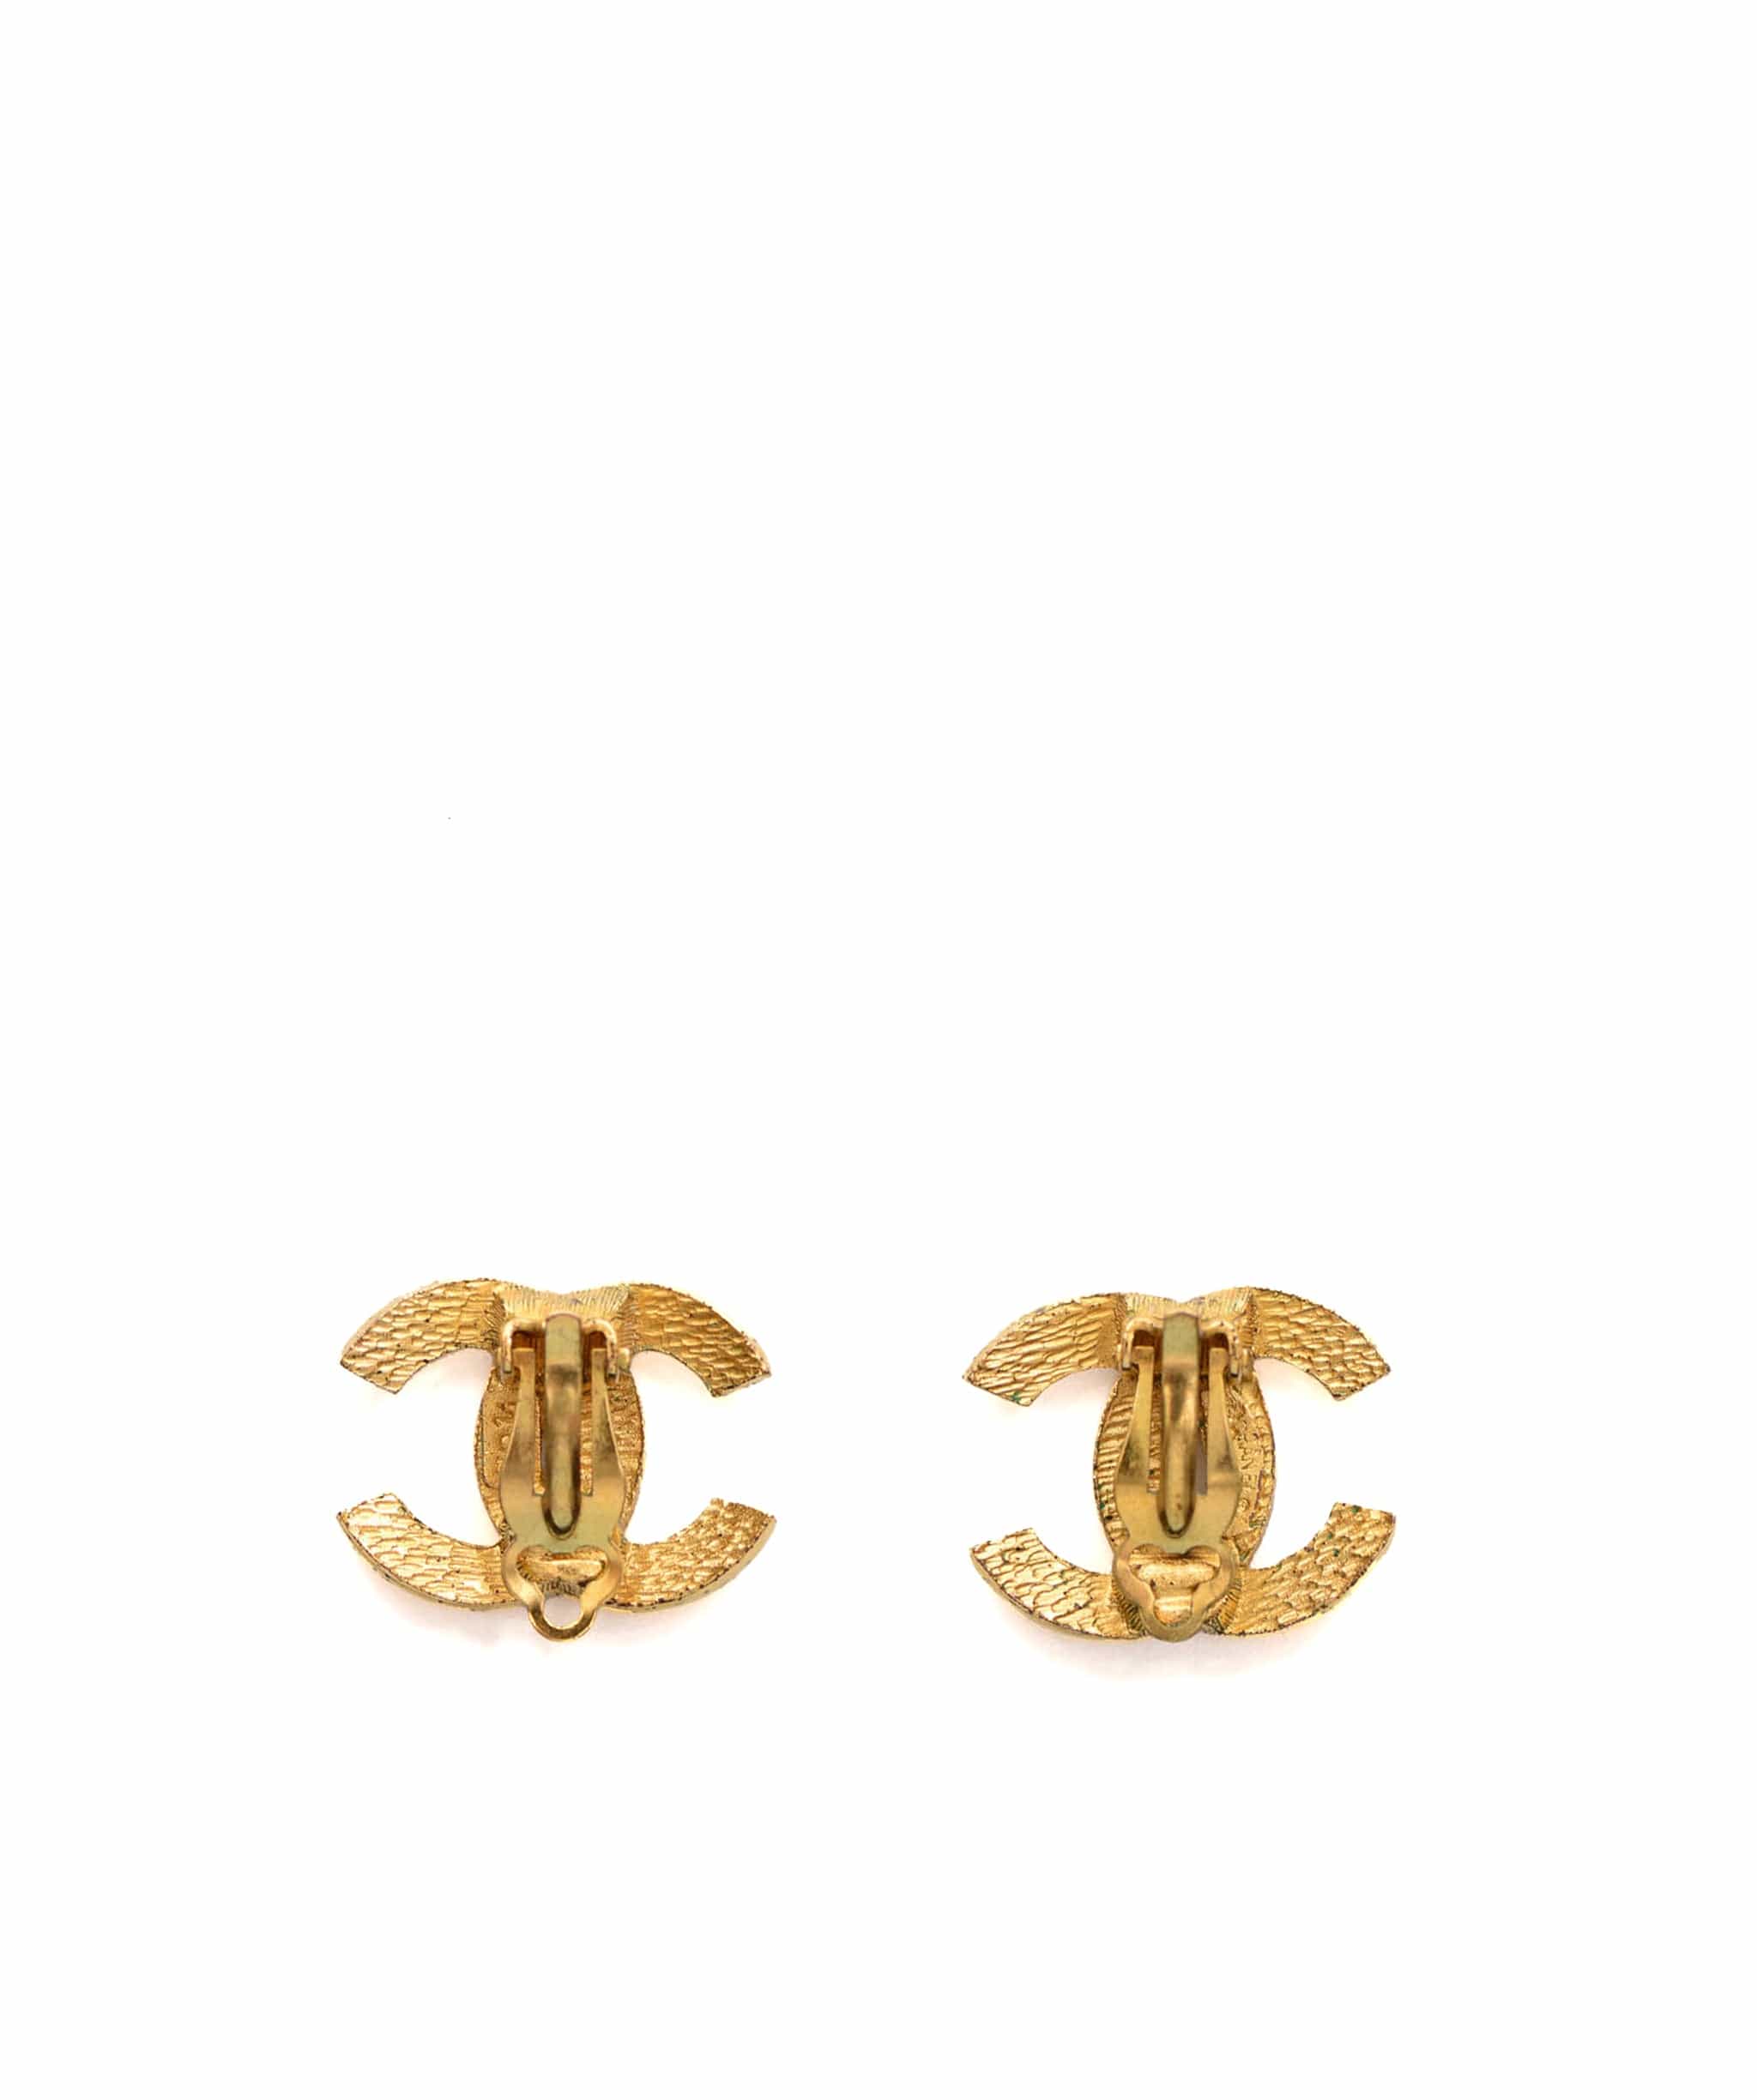 Chanel Chanel Vintage Clip-on Earrings - Classic CC Hammered SKC1130